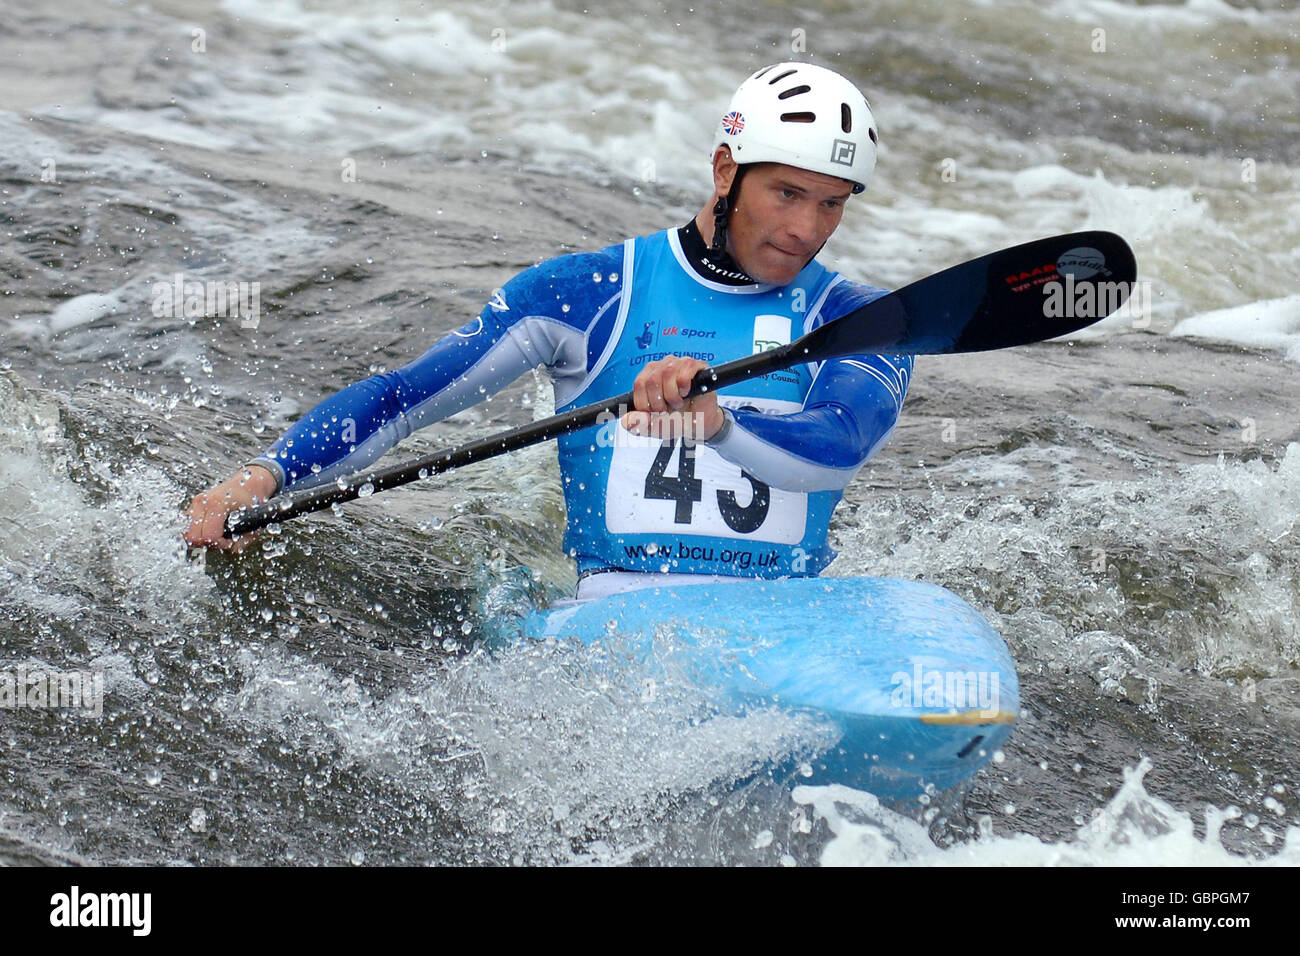 Great Britain's Richard Hounslow during Run 1 of the First Round of the Men's K1 during the European Slalom Championships at Holme Pierrepont, Nottingham. Stock Photo